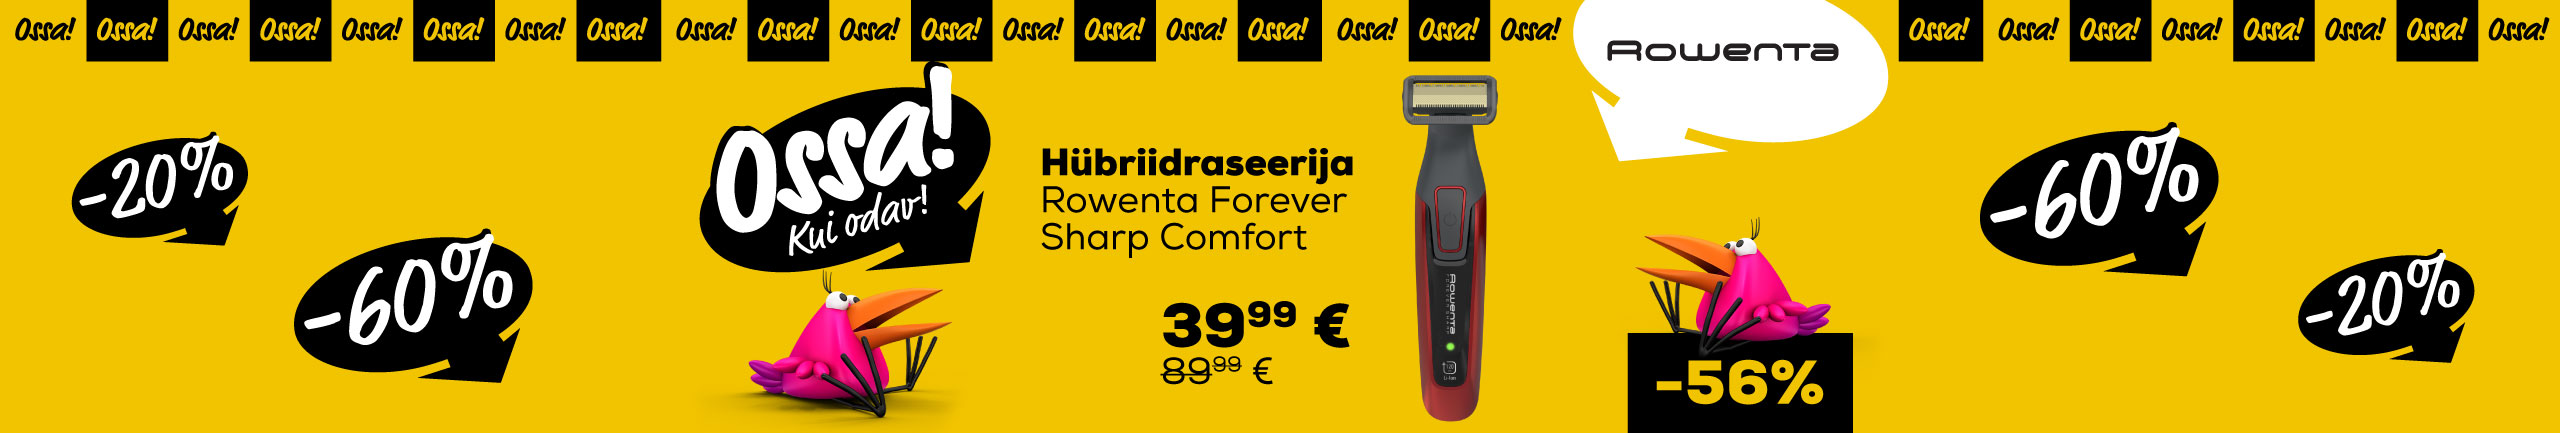 NPL Ossa extended! We added new products! Hybrid trimmer Rowenta Forever Sharp Comfort